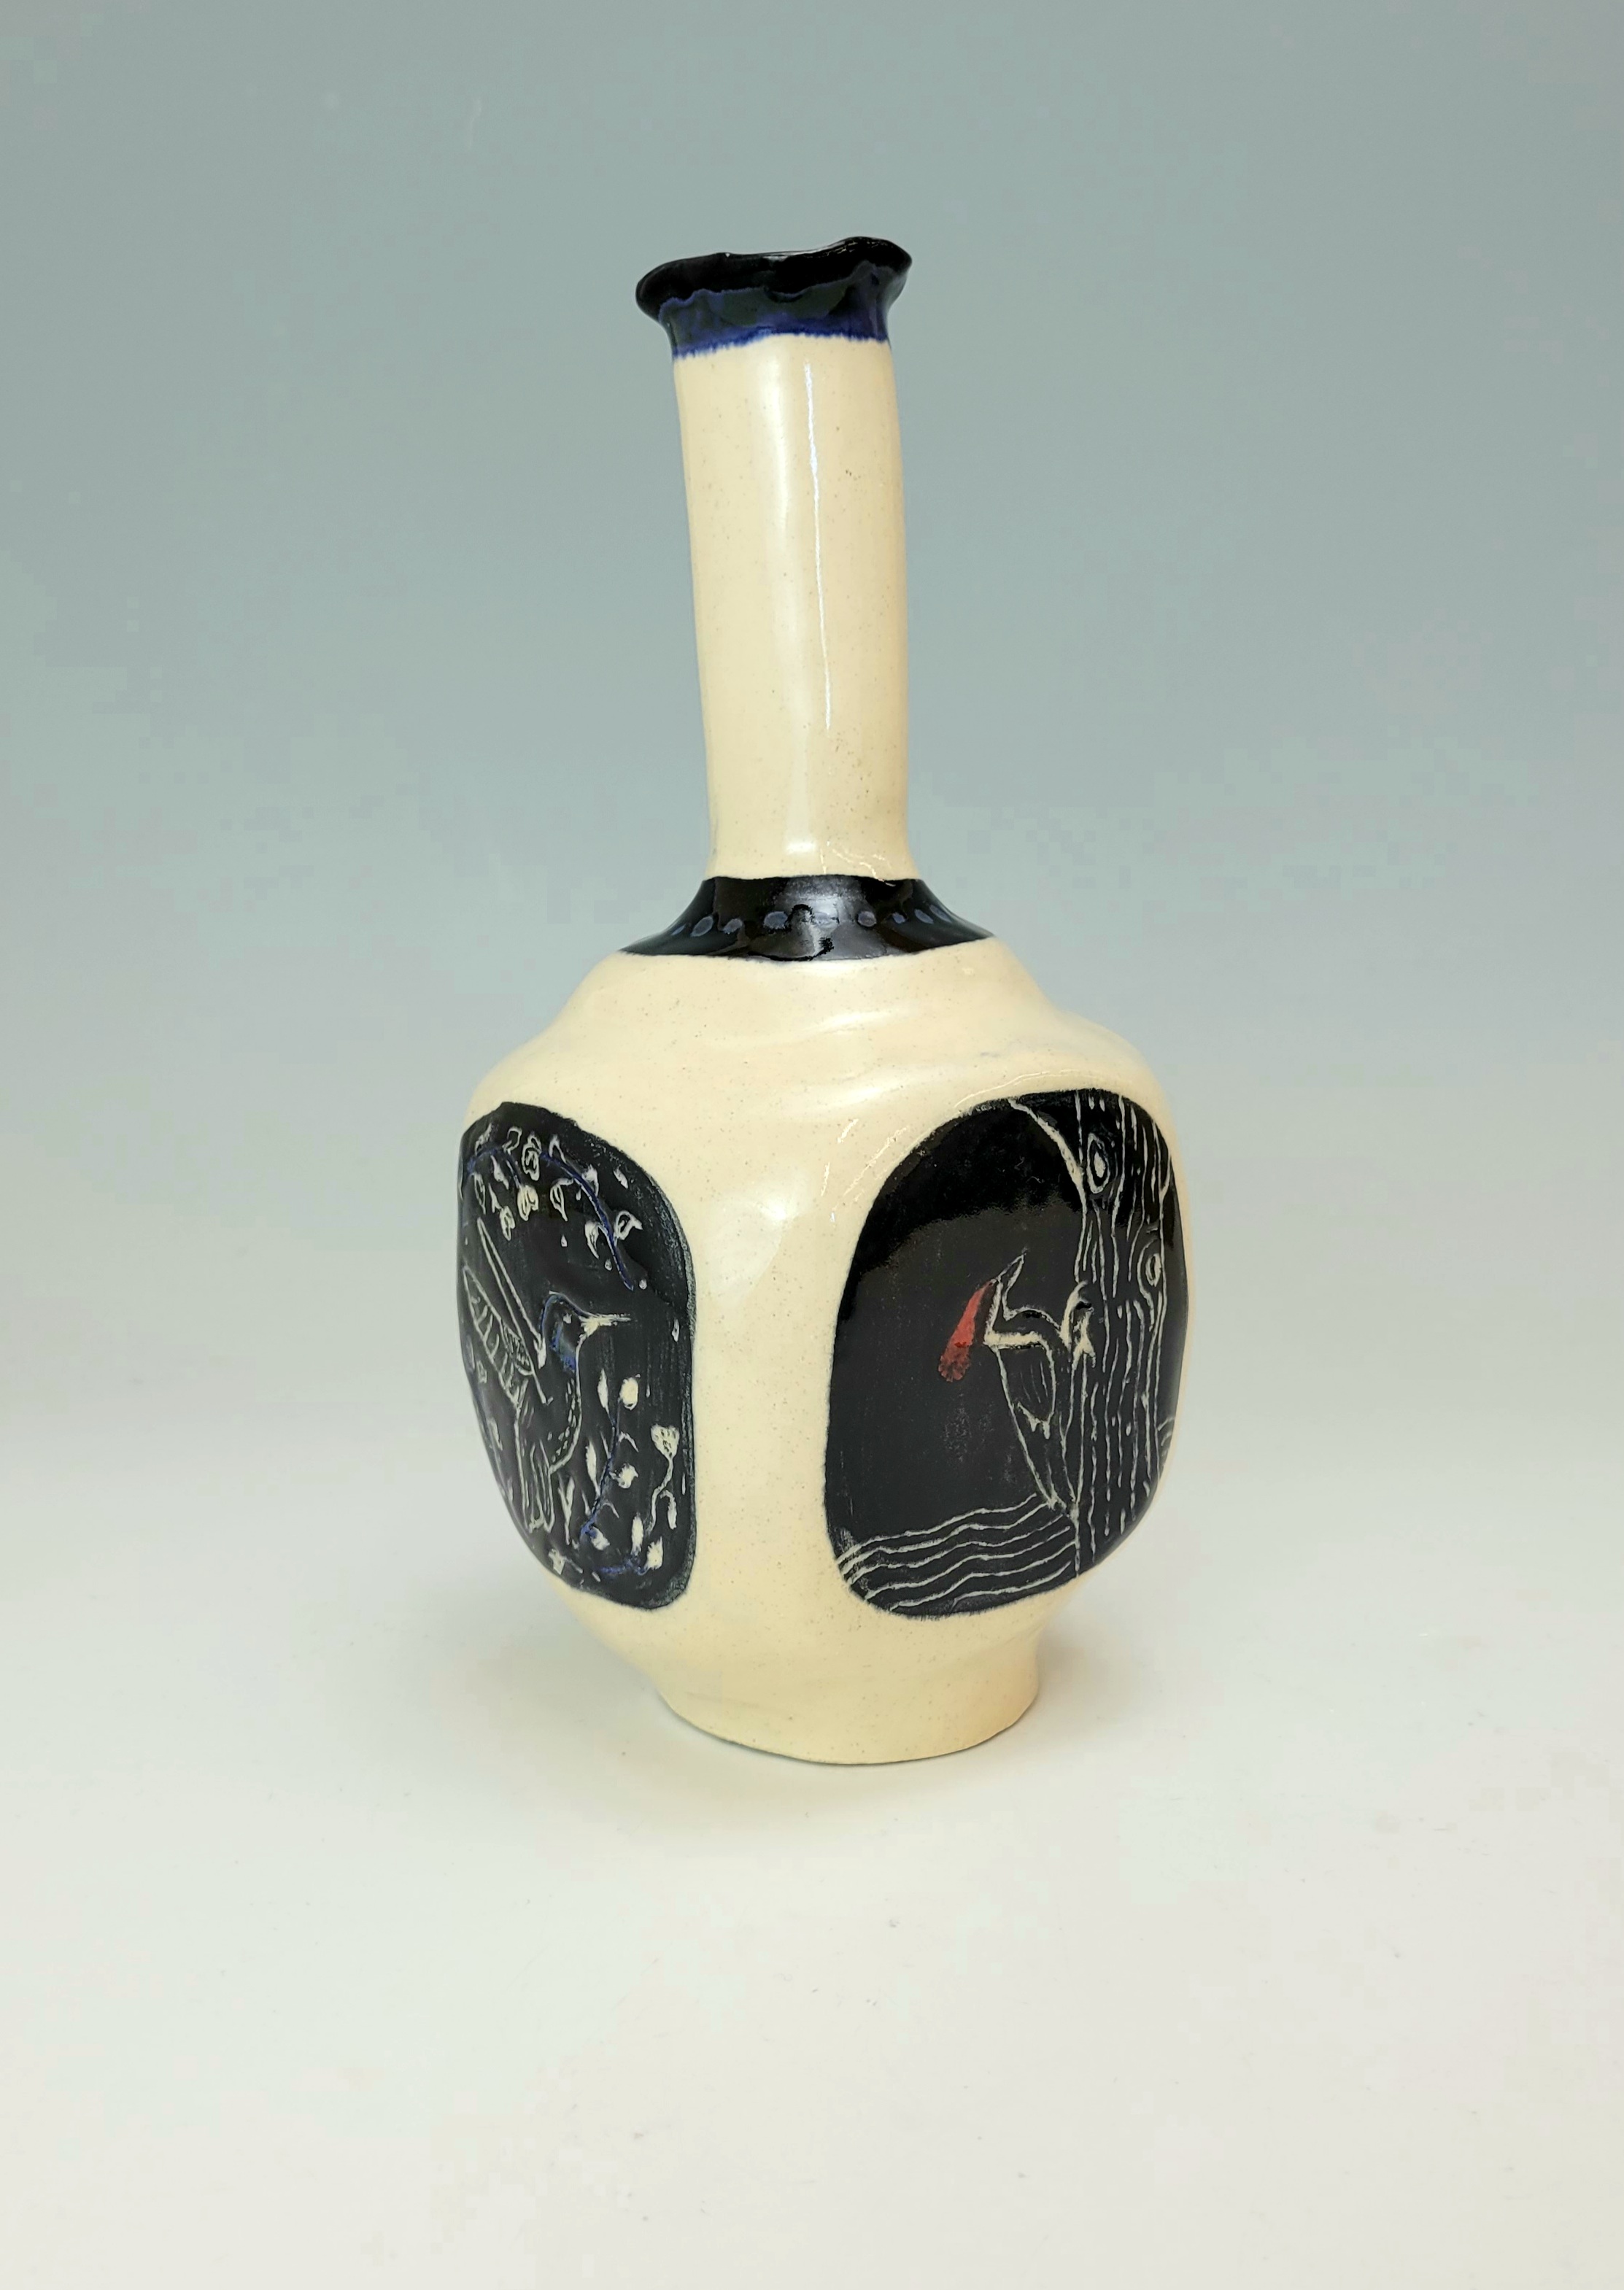 Image of the Sounds of the Forest ceramic vase sculpture.